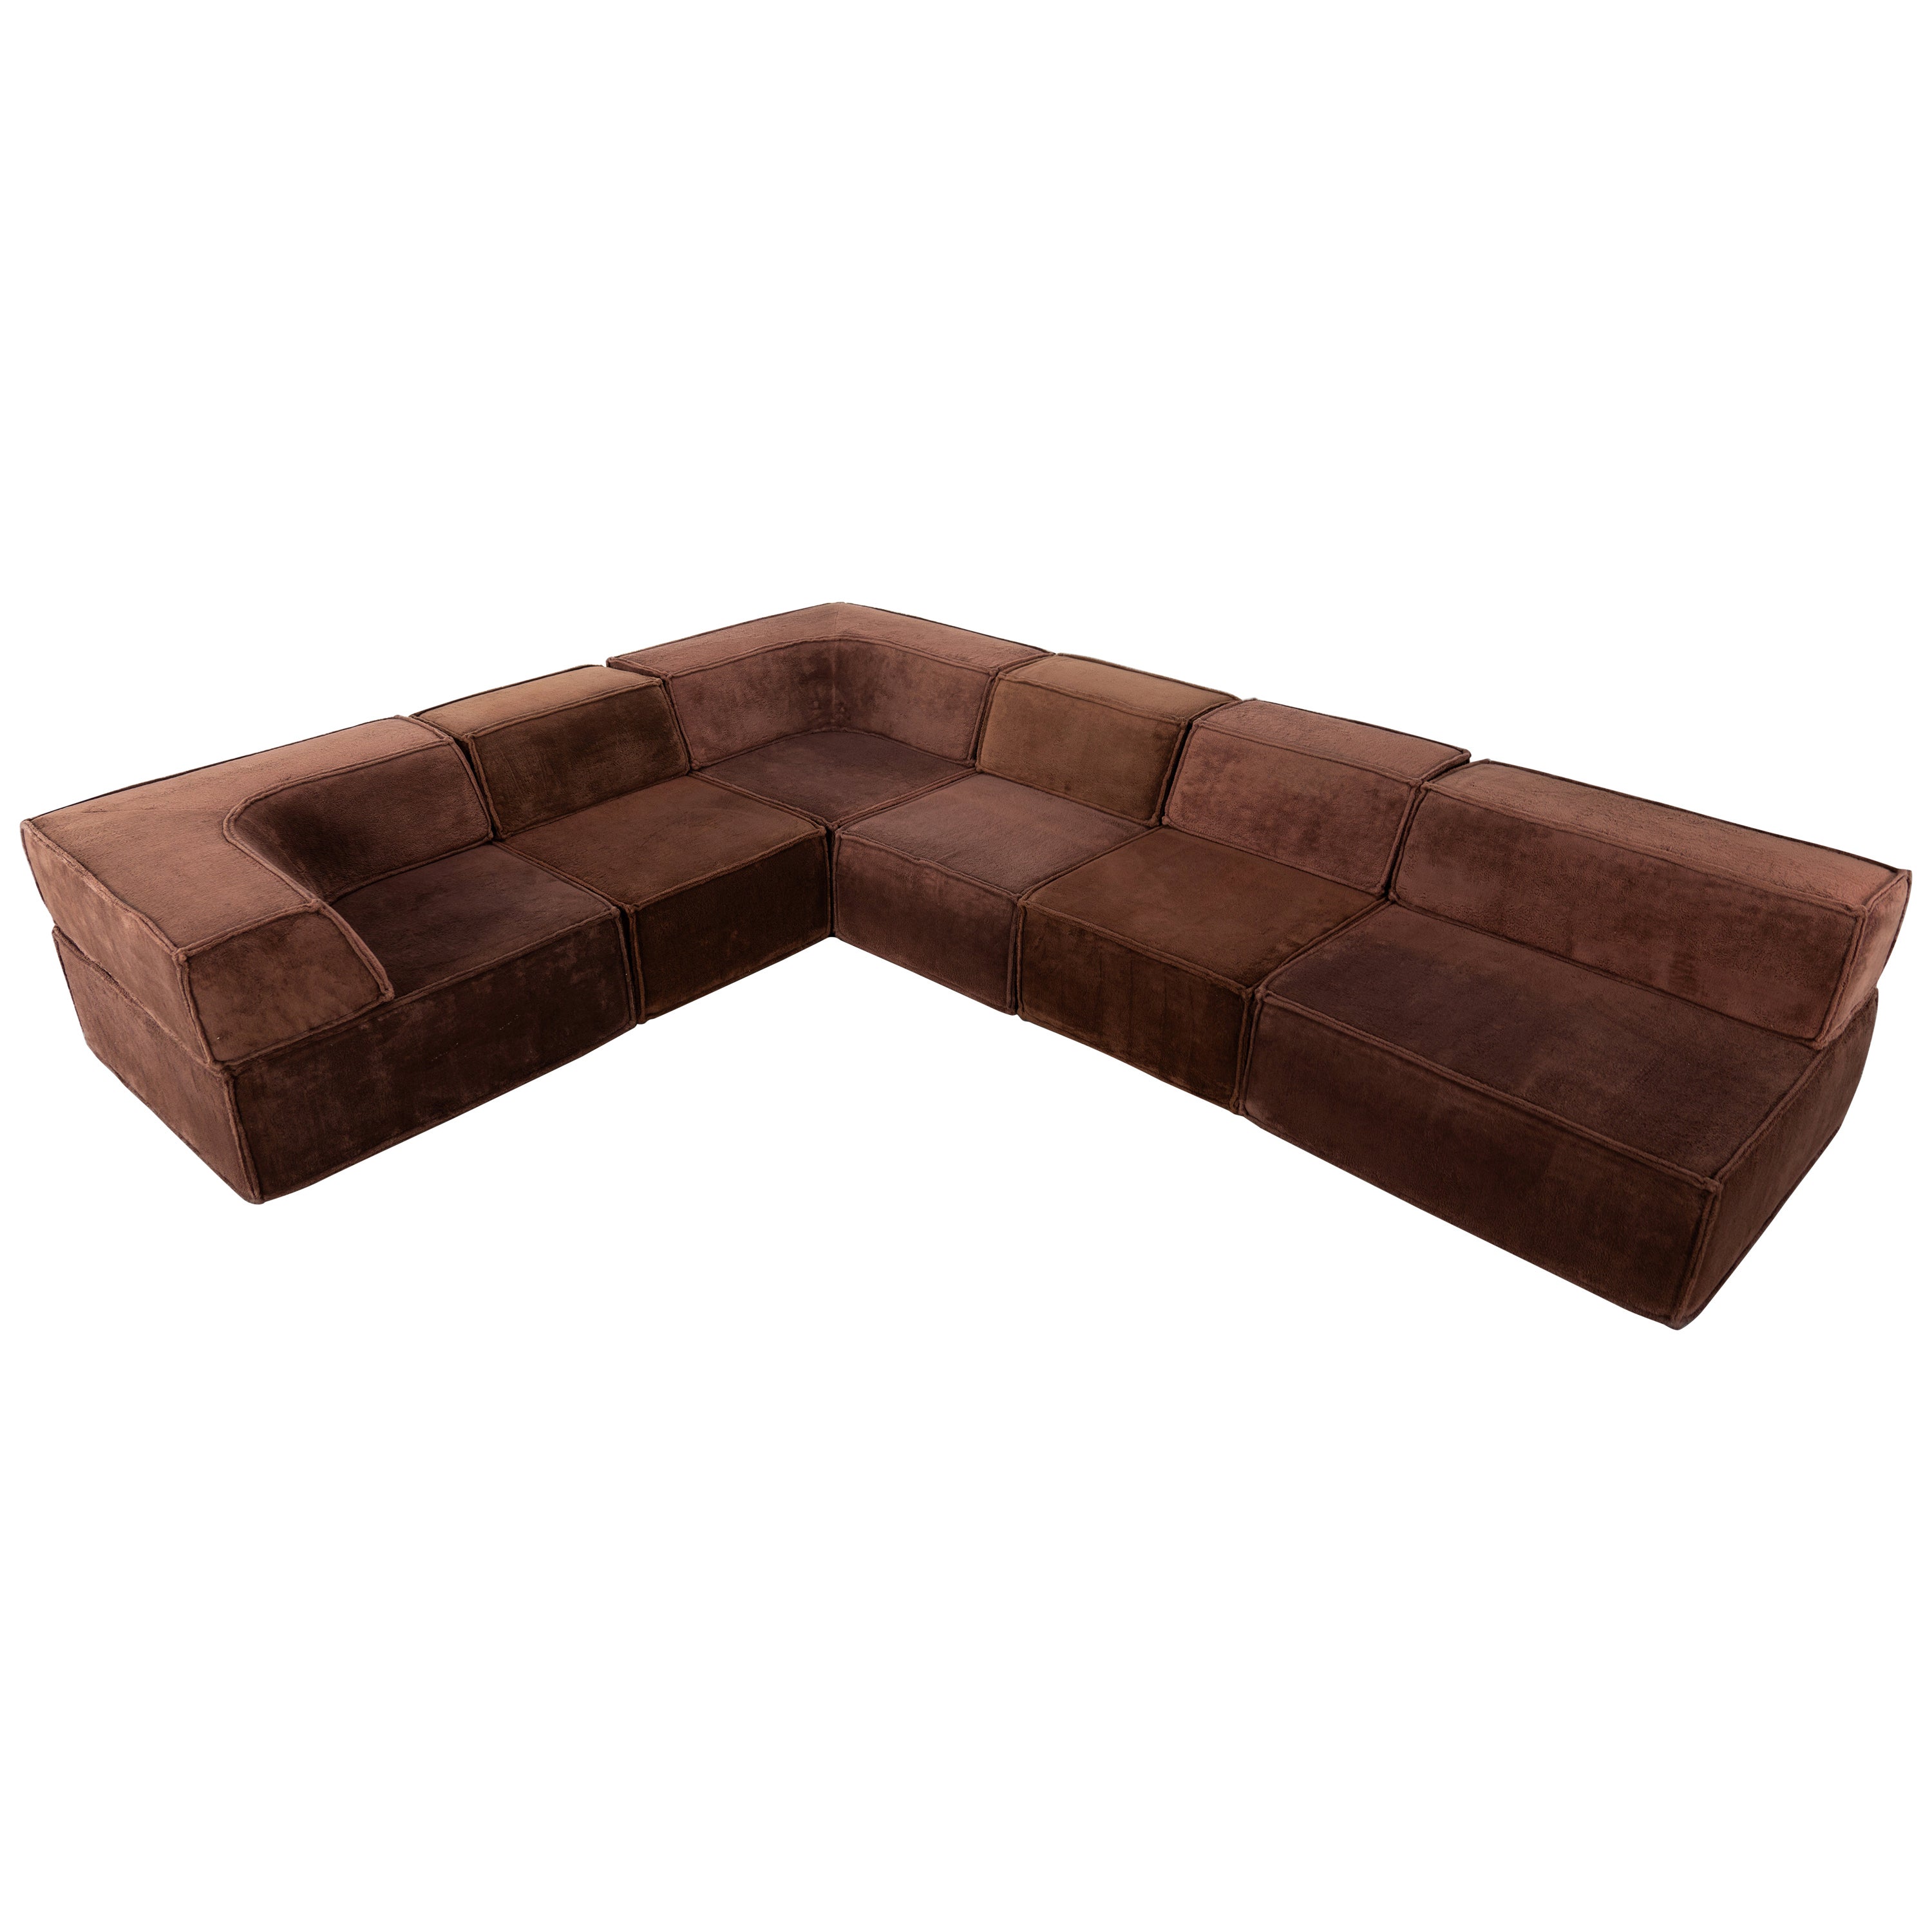 Cor Trio Modular Sofa Giant Landscape Brown Chocolate 1972 by Team Form AG For Sale